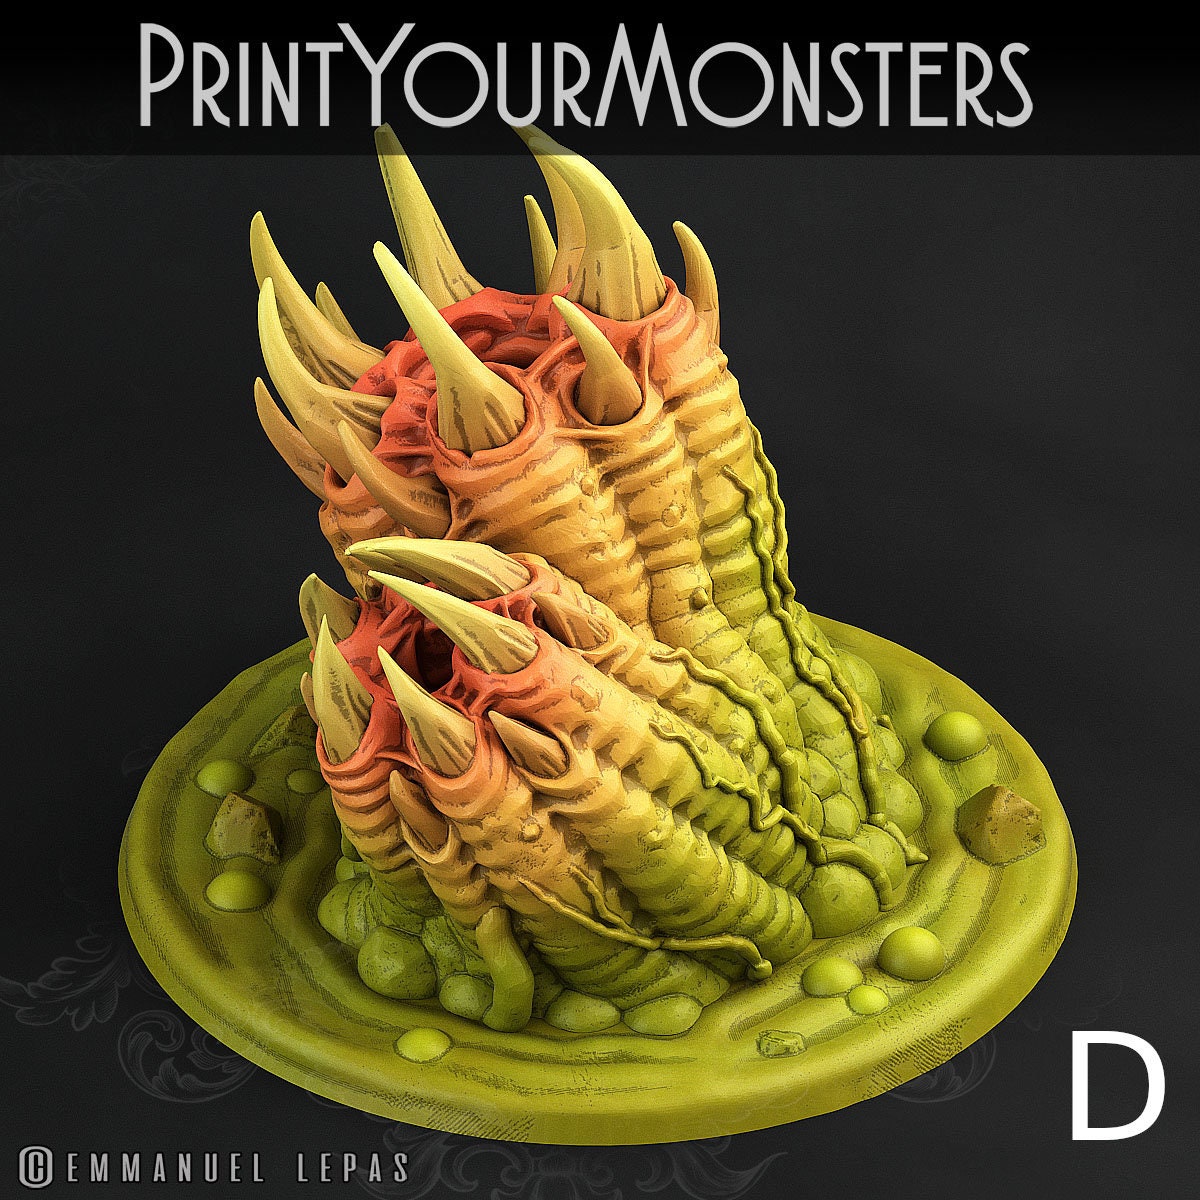 Swamp Worms - Print Your Monsters 